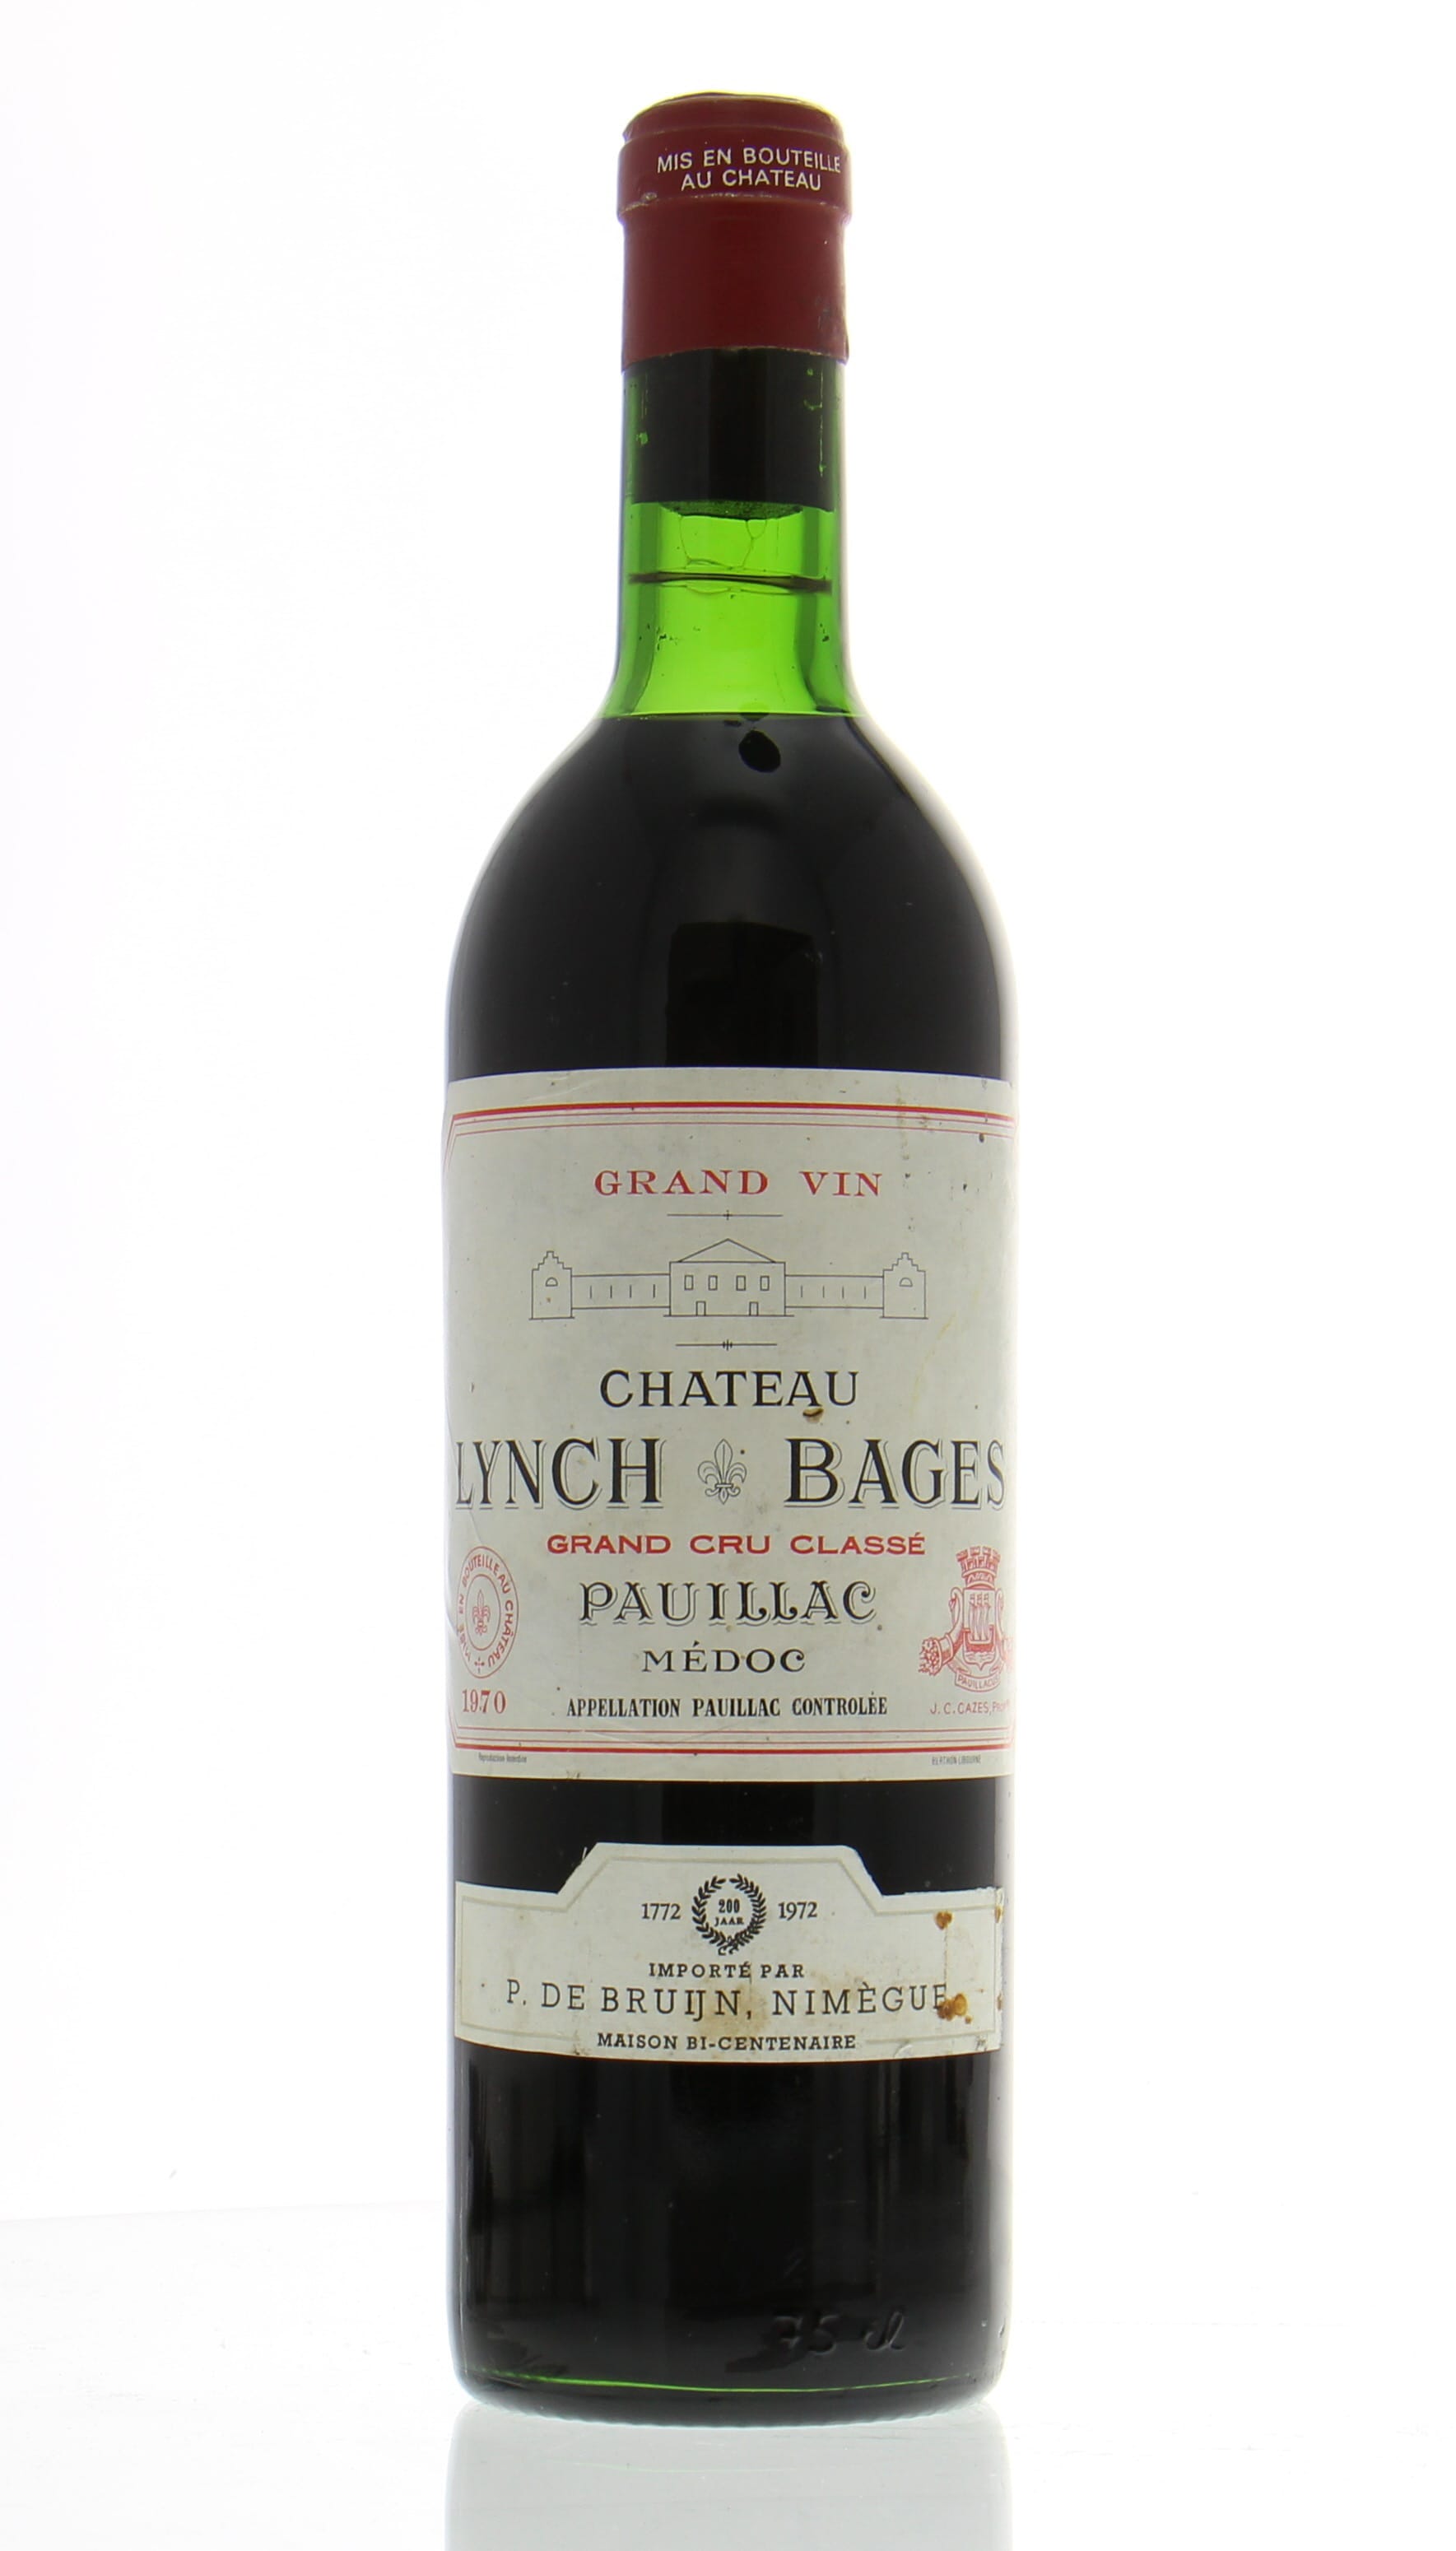 Chateau Lynch Bages - Chateau Lynch Bages 1970 Top shoulde